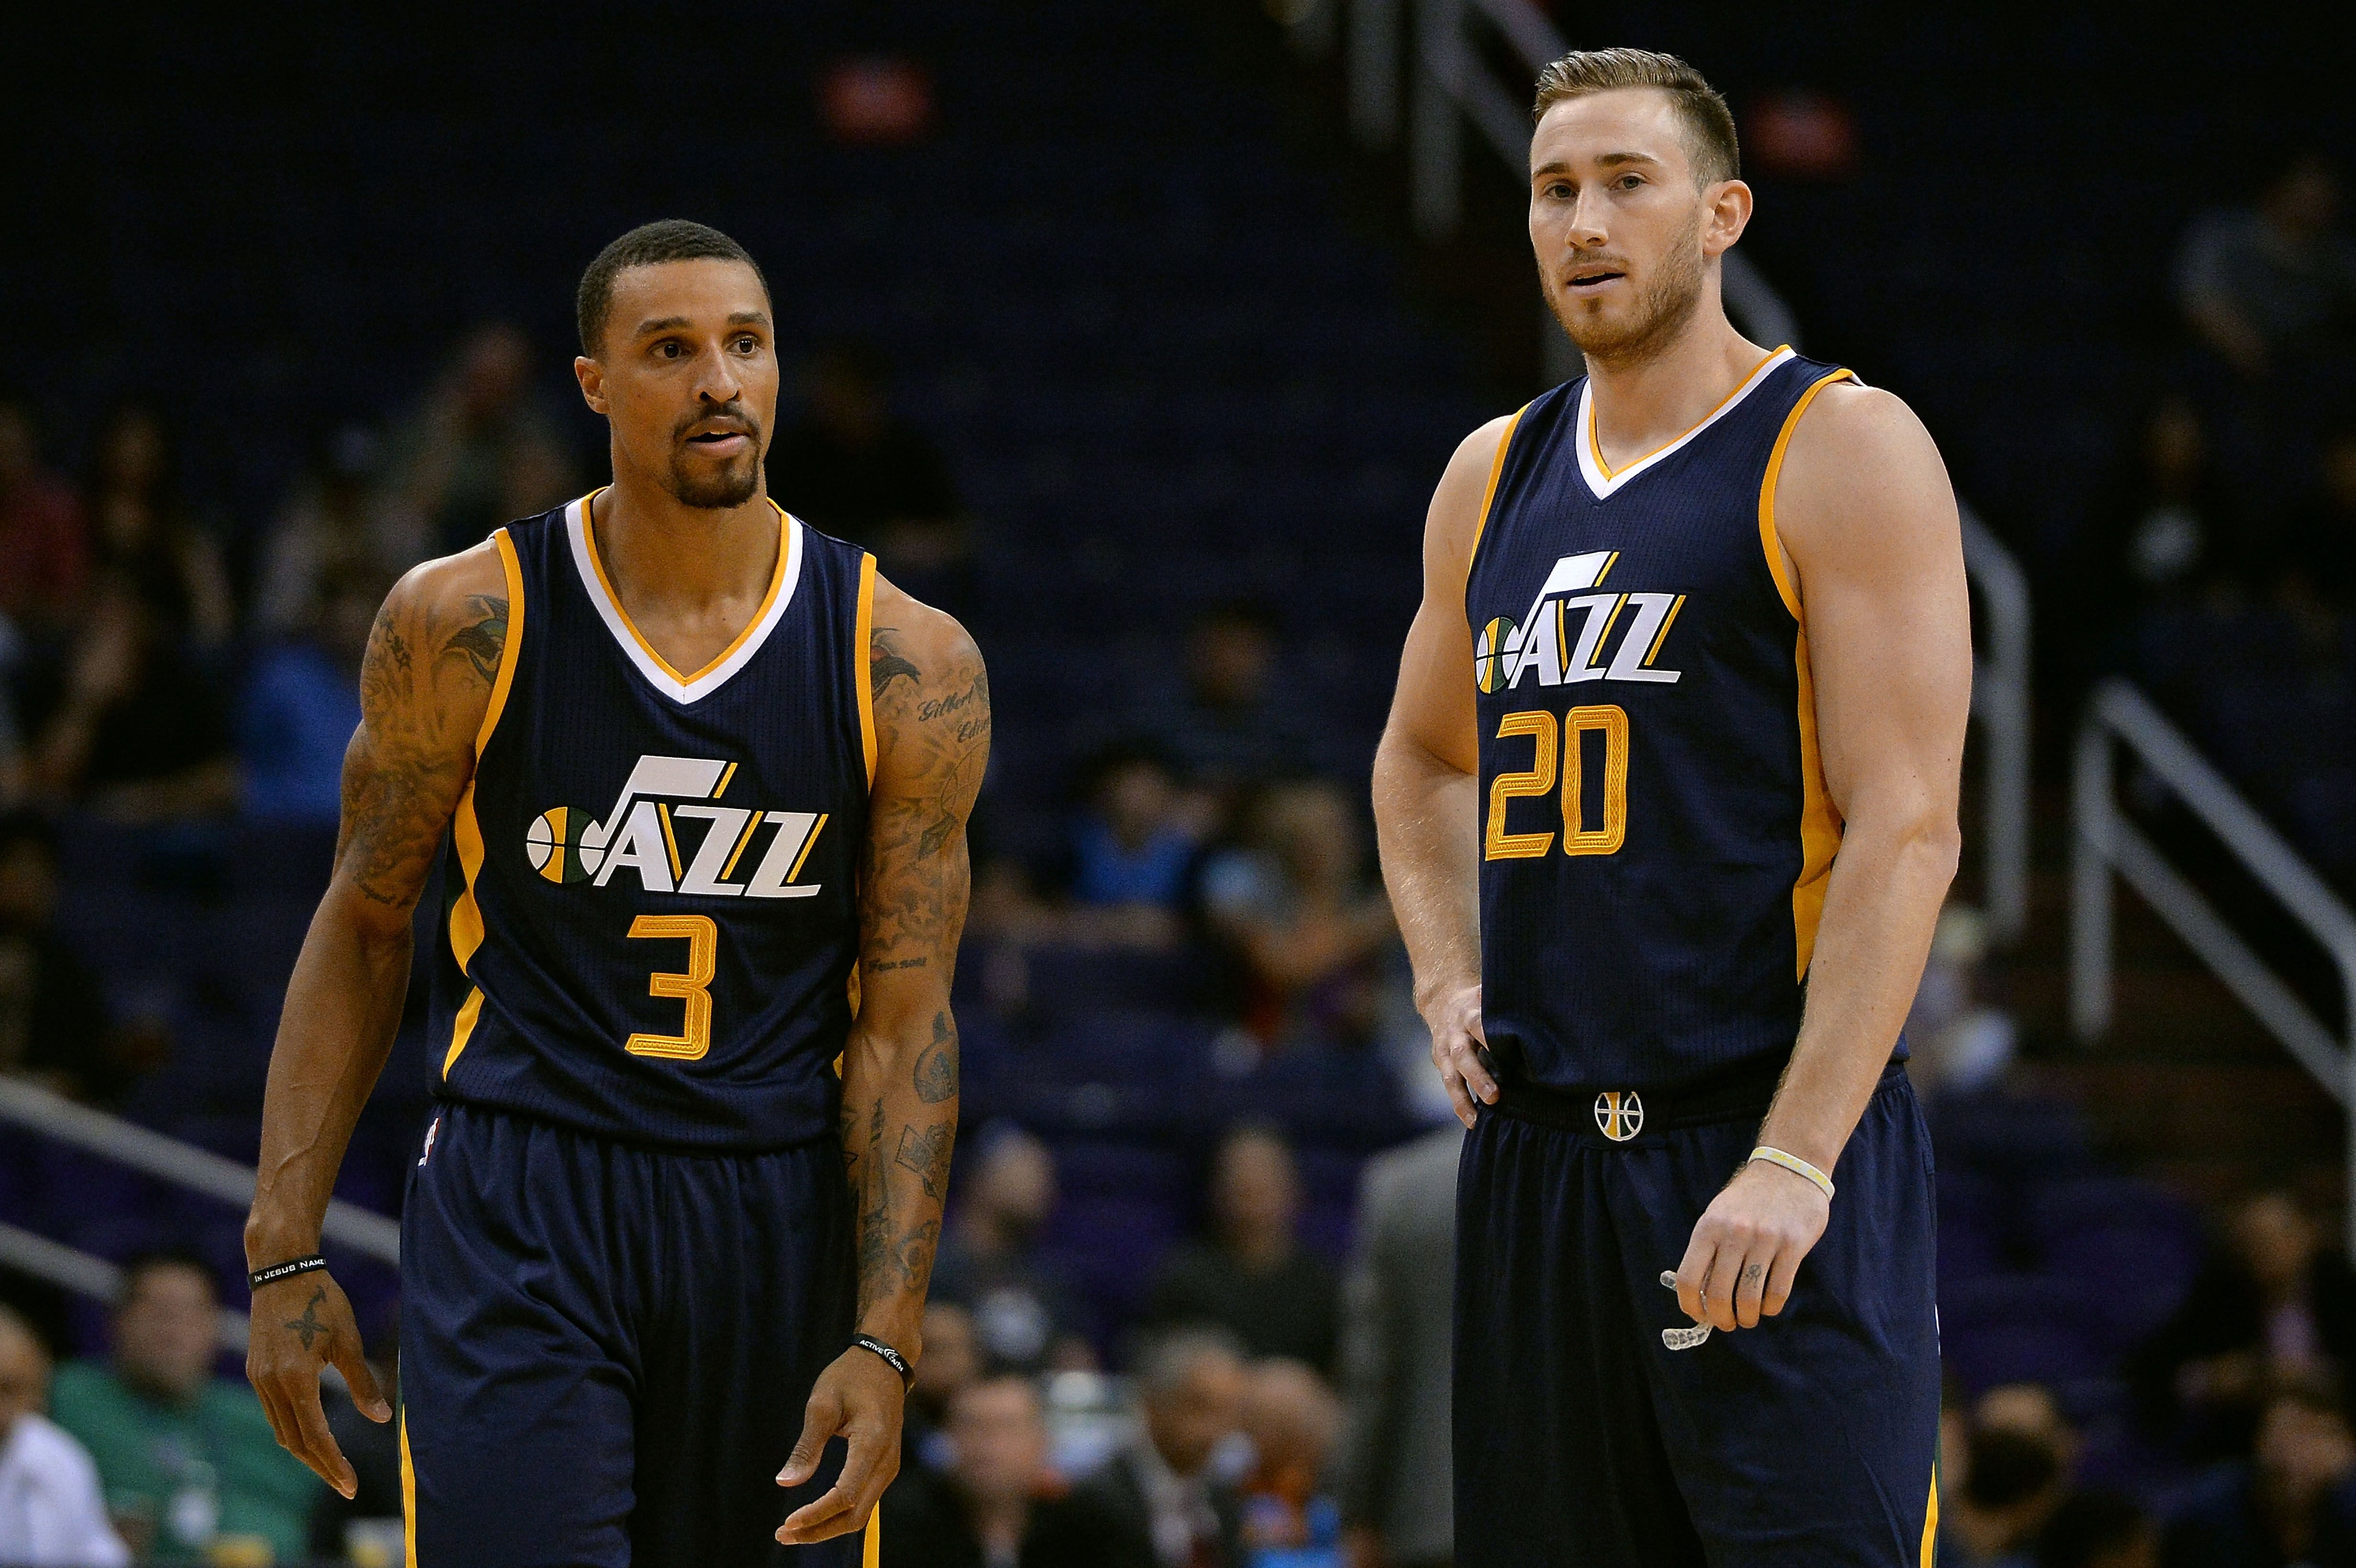 Utah Jazz: Who's staying and who's going in 2017 free agency?